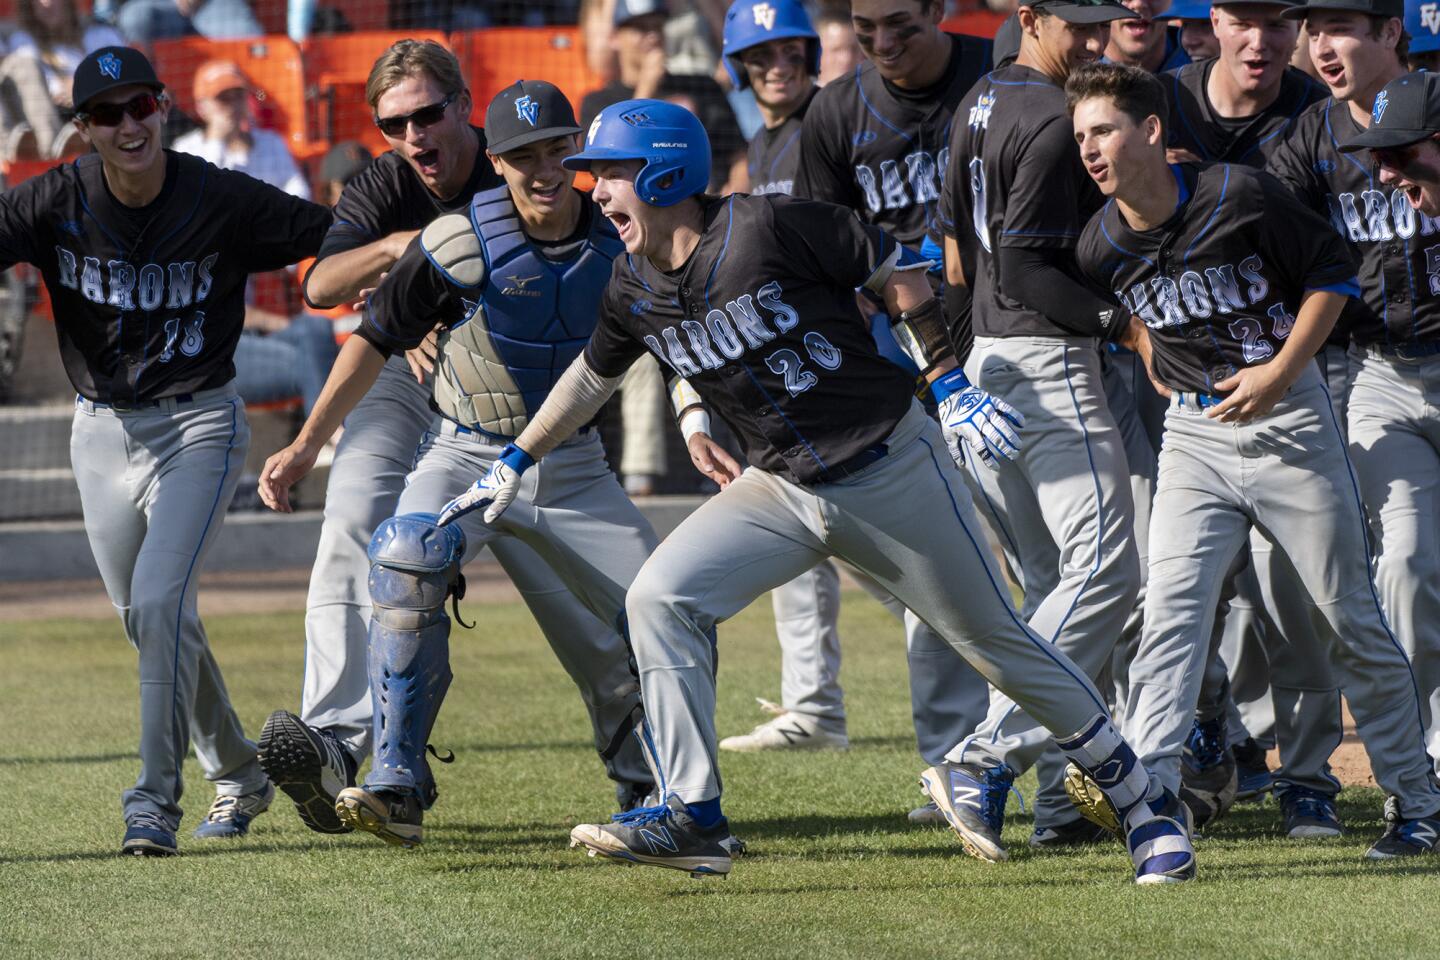 Fountain Valley's Cole Wentz is chased by his teammates back to the dugout after he hit a grand slam in the fourth inning of a Sunset League game against Huntington Beach on Wednesday, April 25.